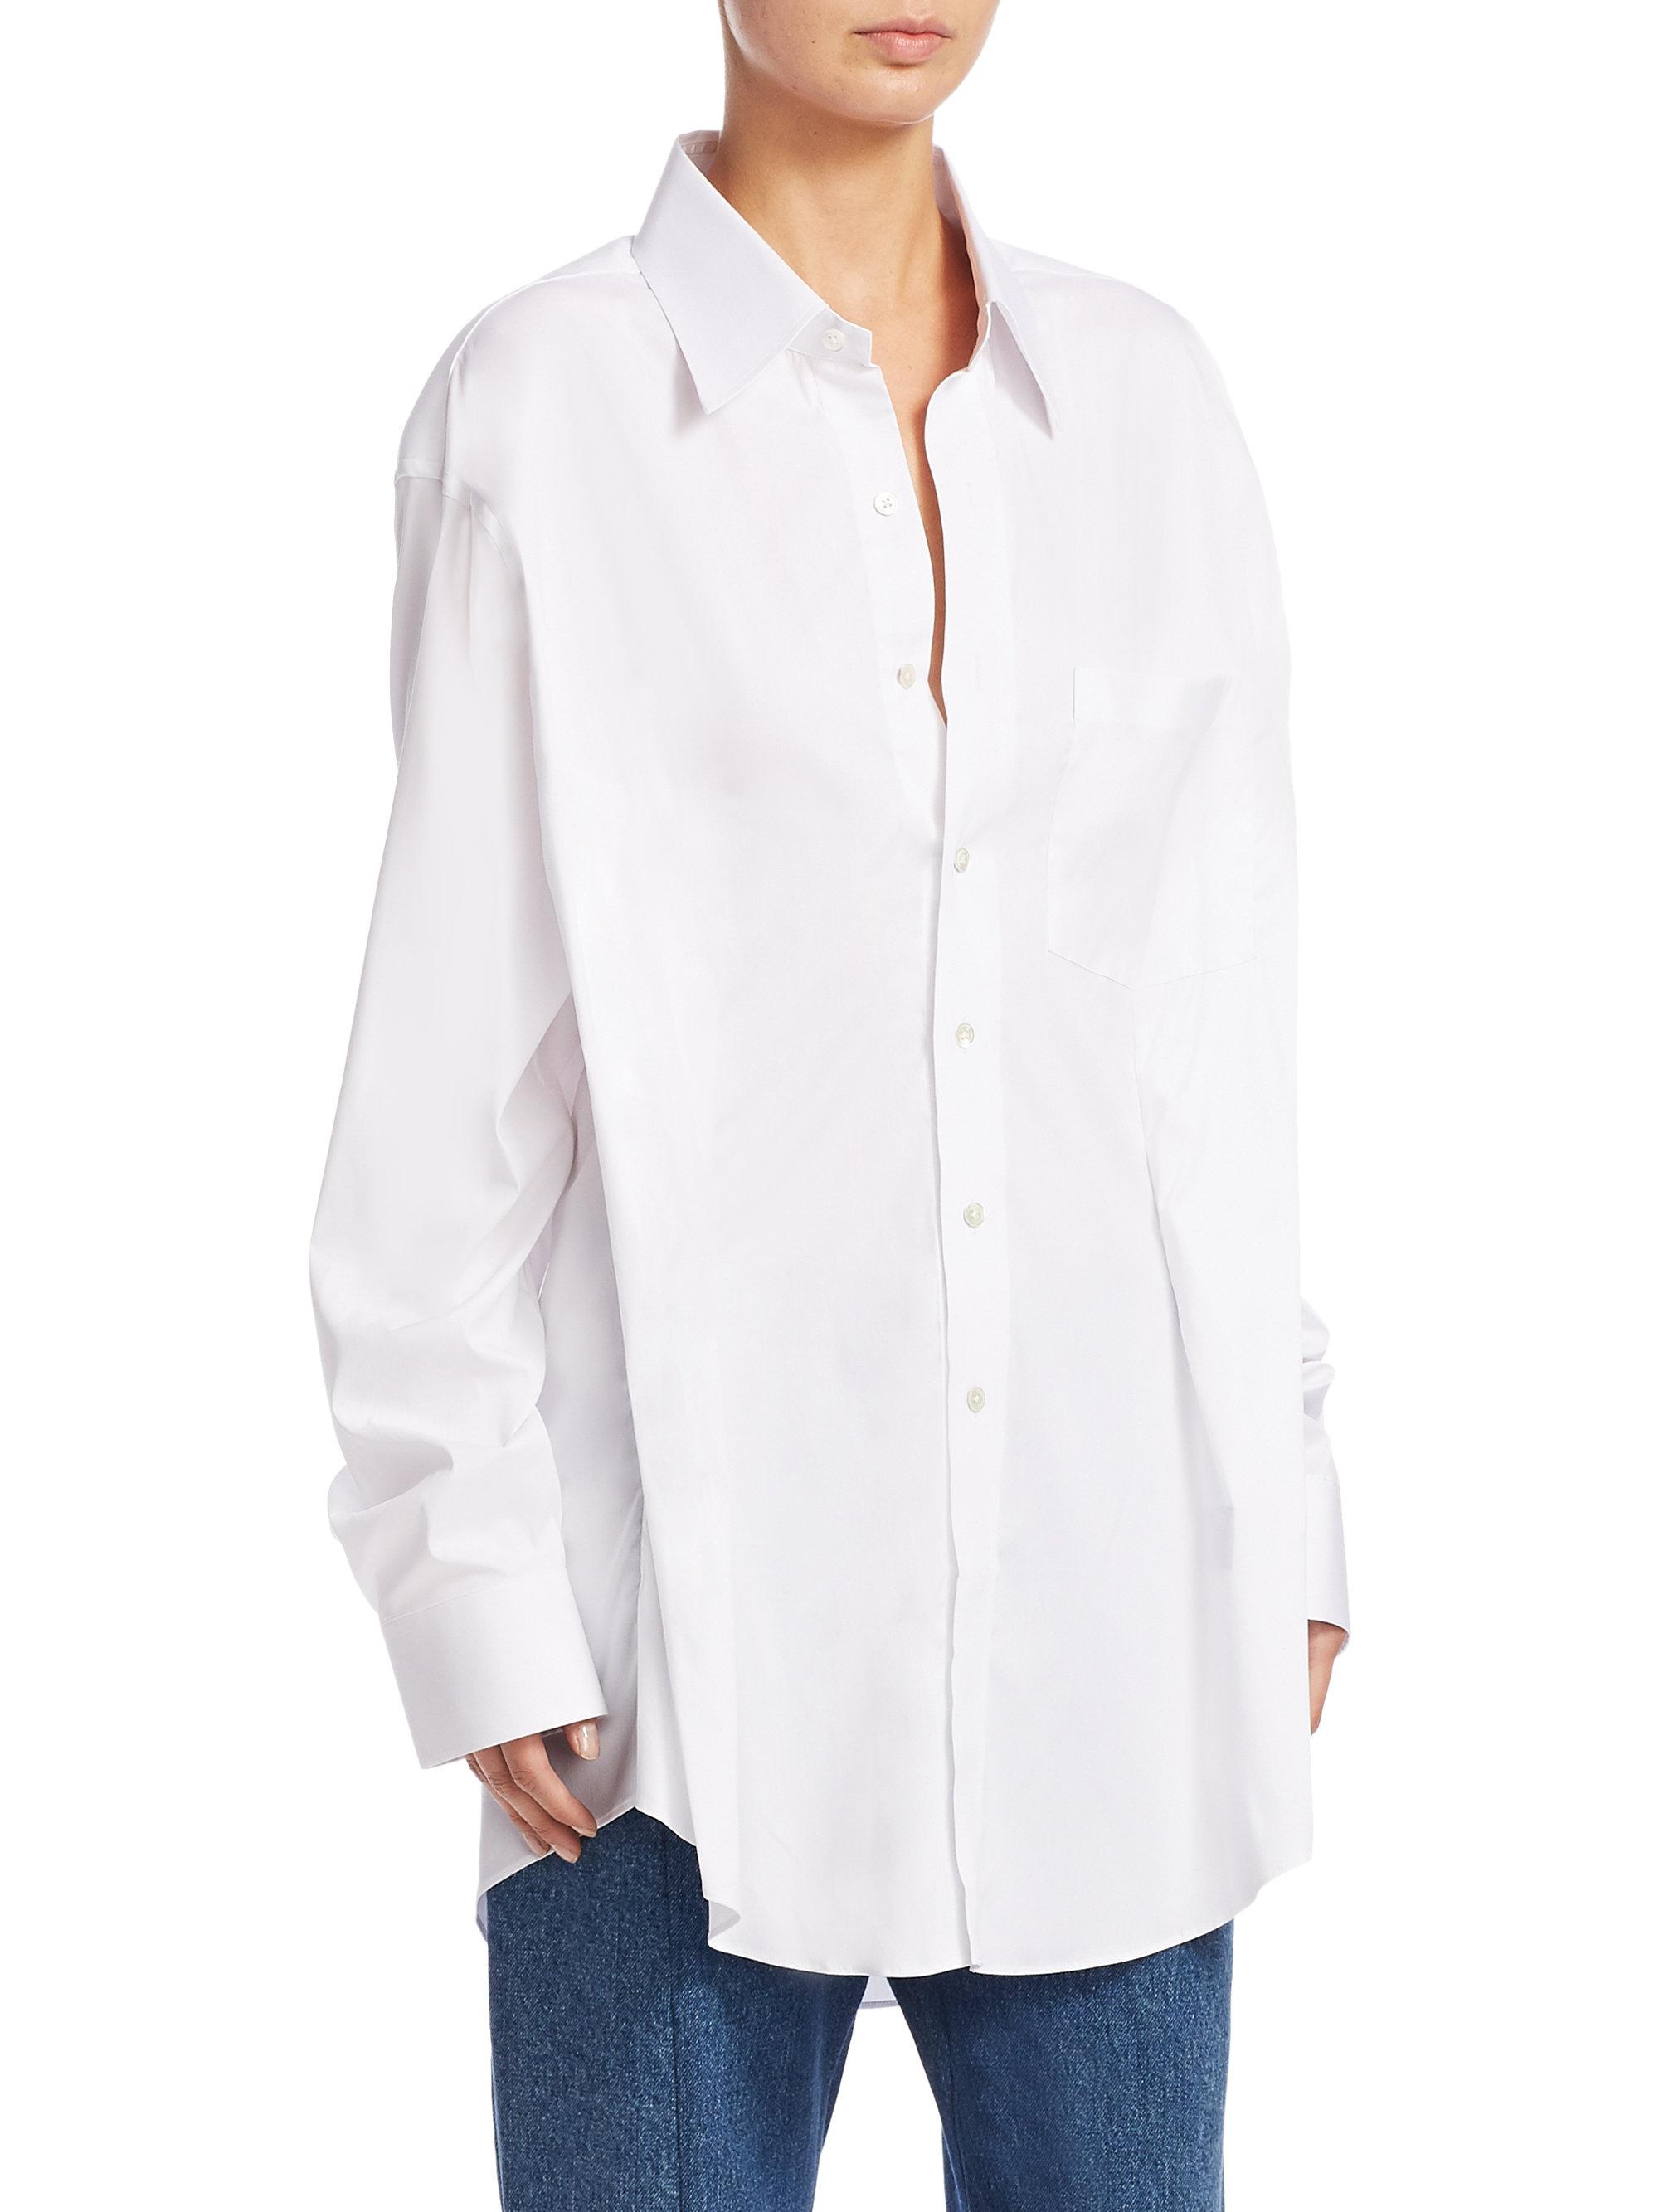 Lyst - Vetements Secretary Button-front Shirt in White